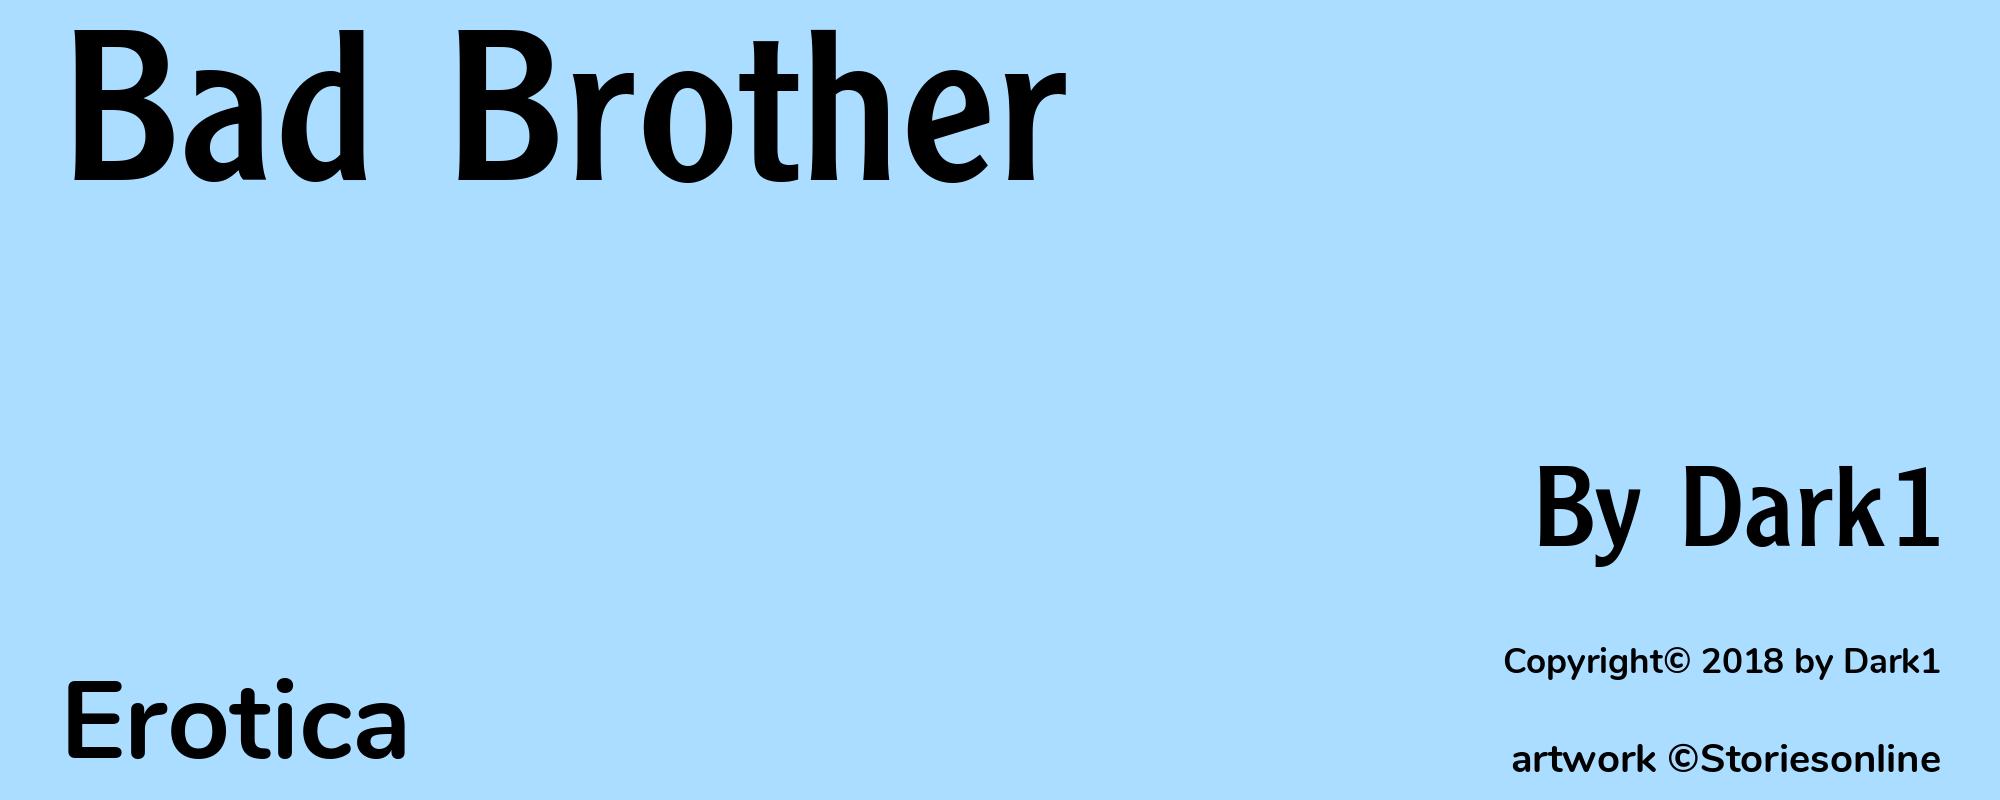 Bad Brother - Cover